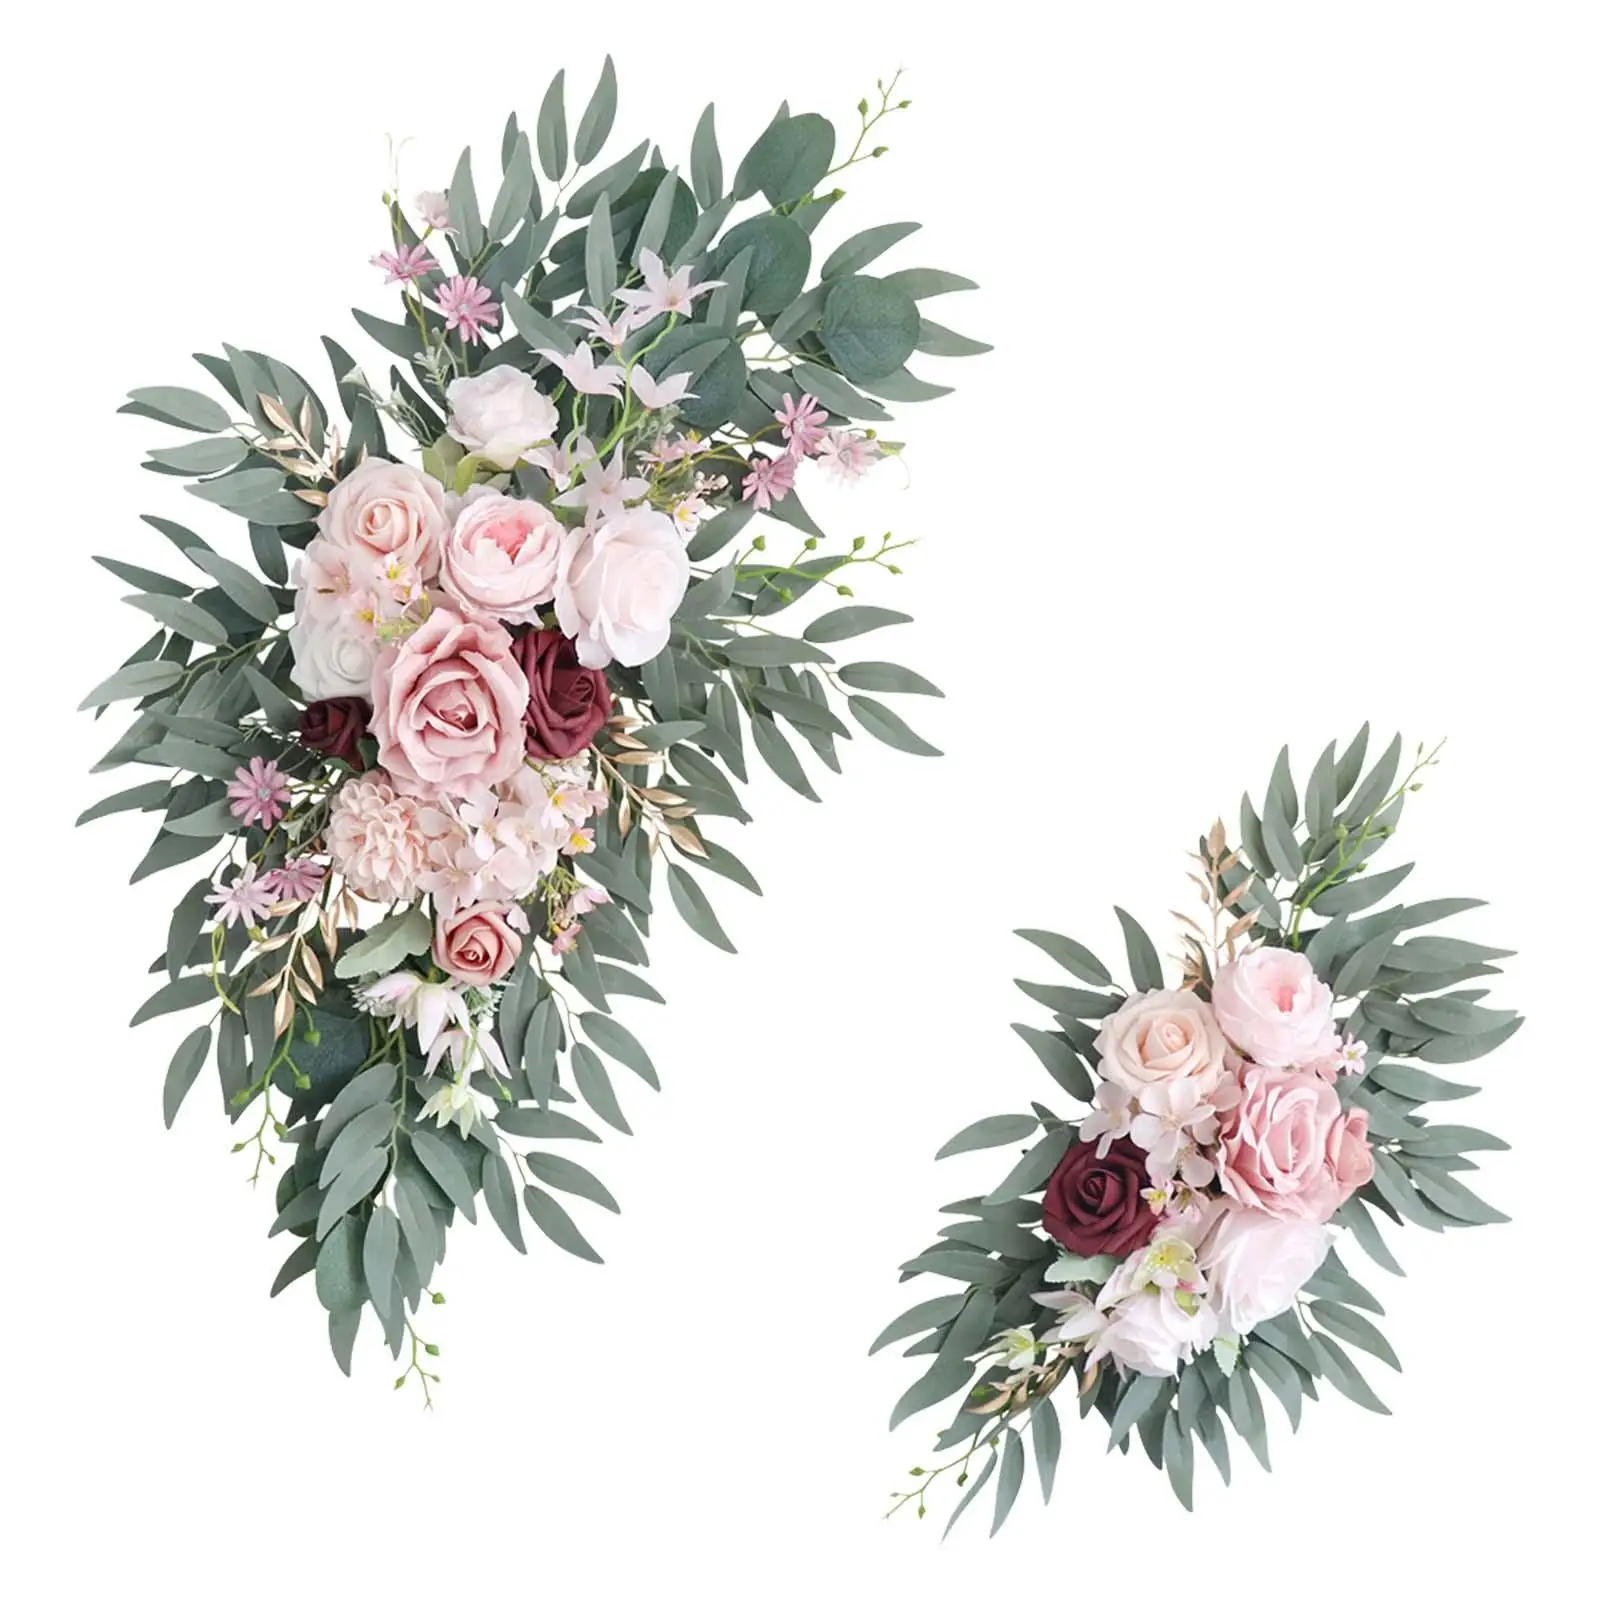 

2x Artificial Rose Flower Swag Farmhouse Floral Swags Eucalyptus Leaves Wedding Arch Flowers for Drapes Holiday Table Backdrop